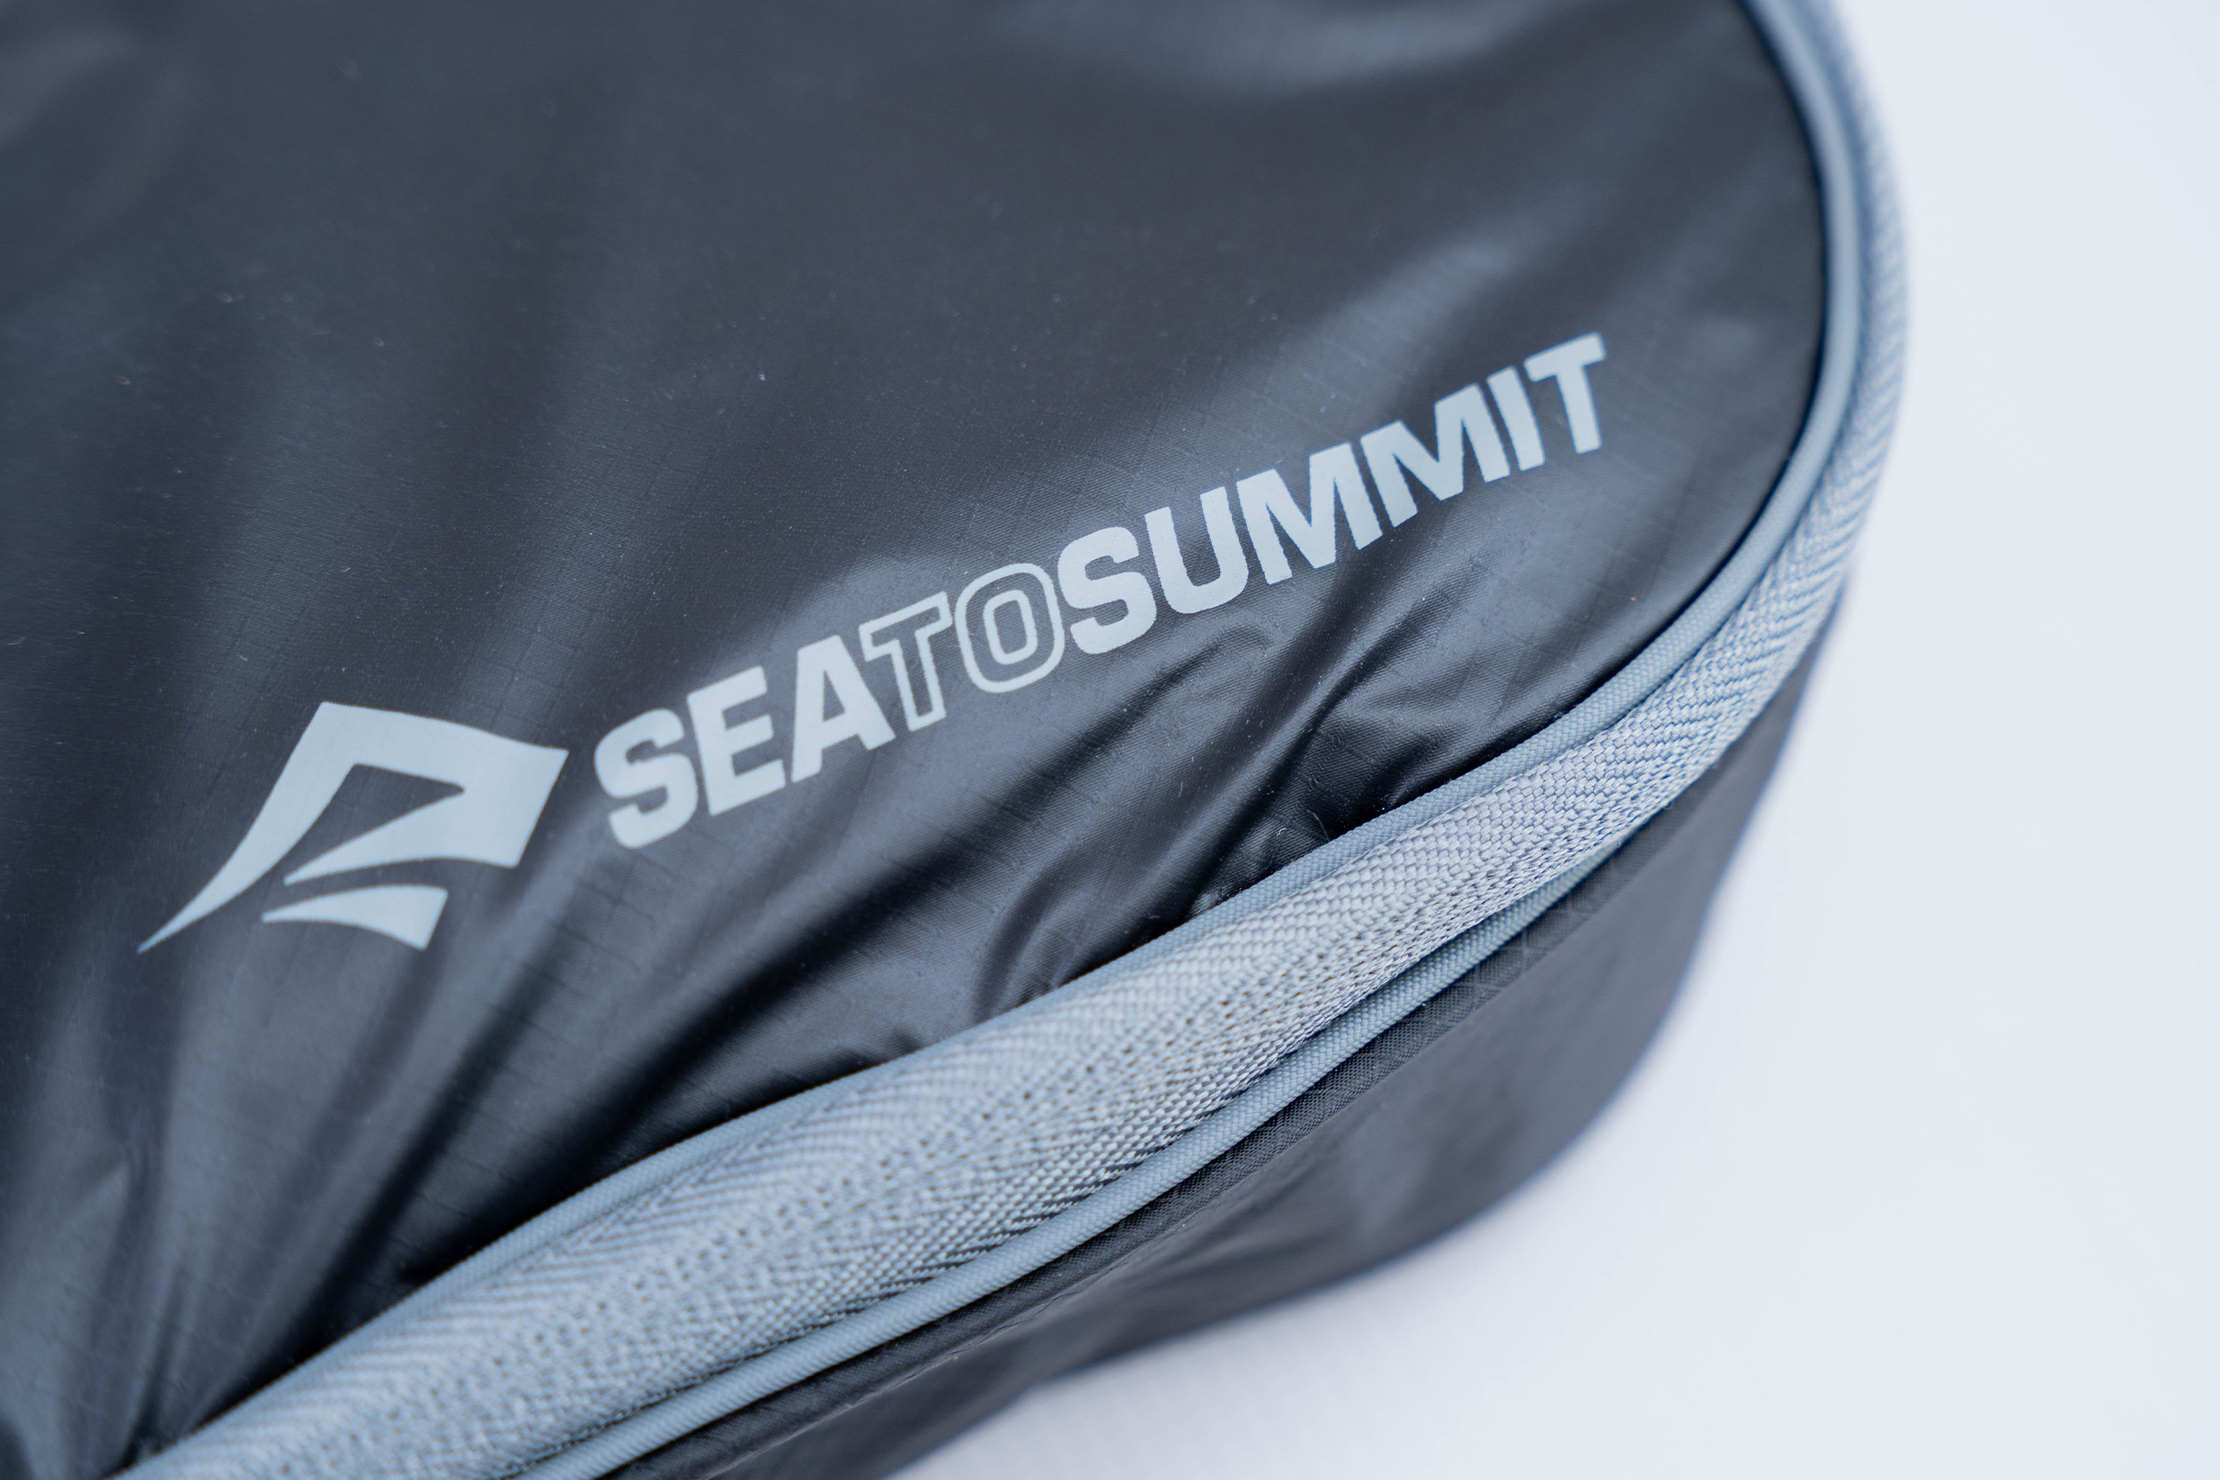 Sea to Summit Hanging Toiletry Bag Brand